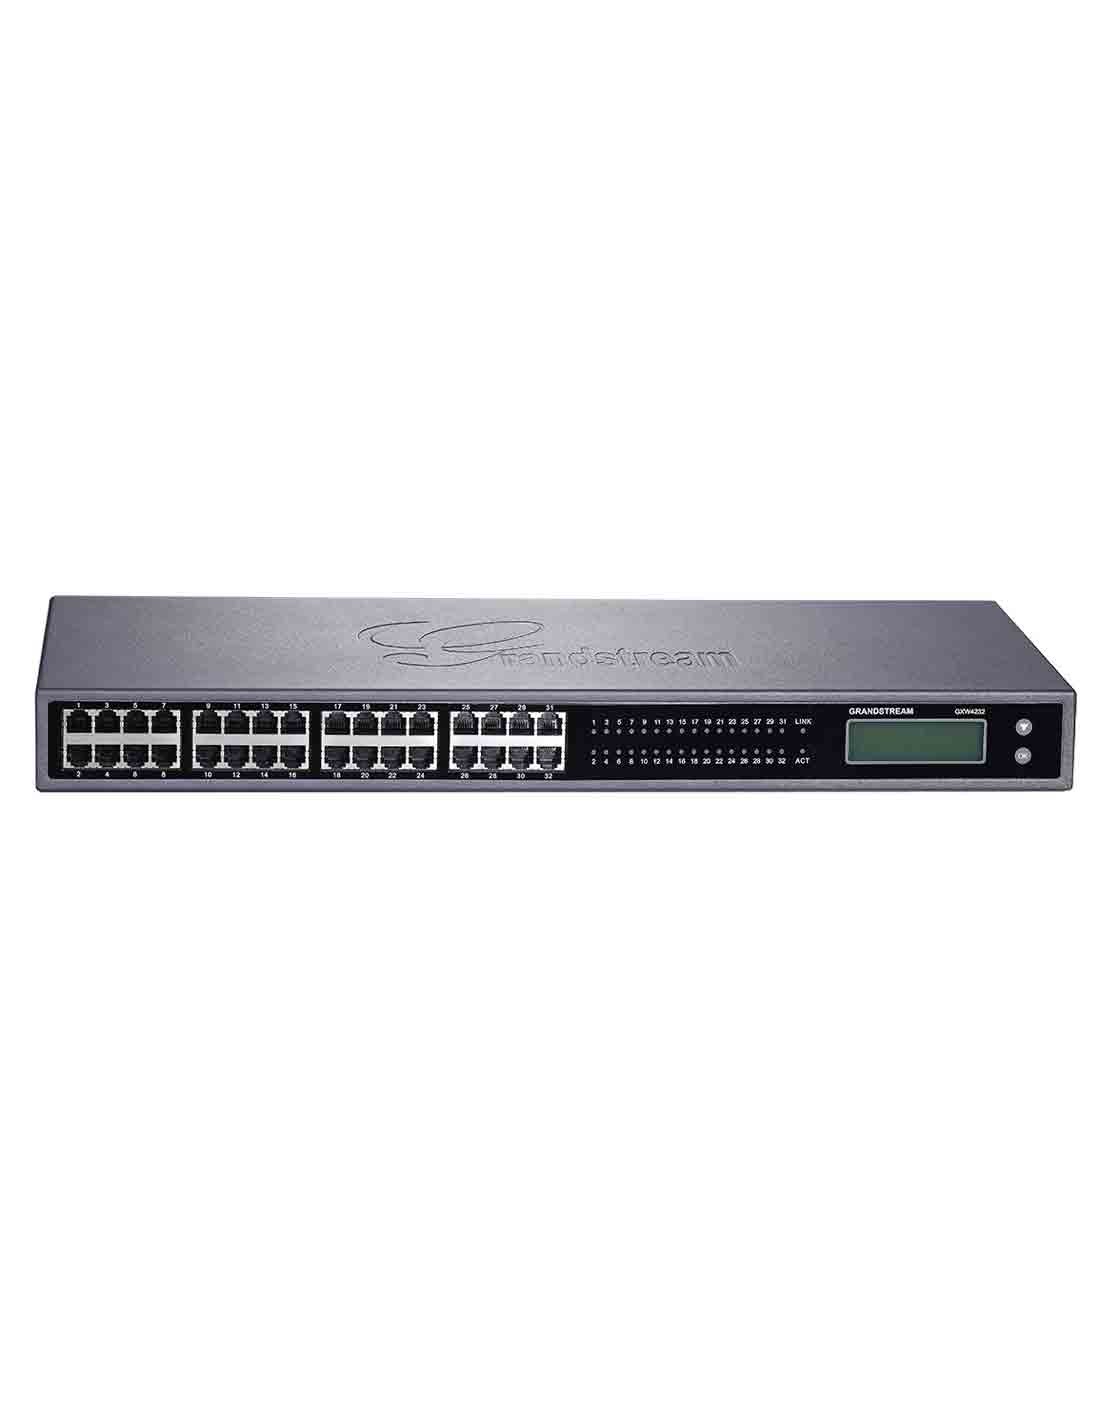 Grandstream GXW4232 FXS IP Gateway at a cheap price and free delivery in Dubai